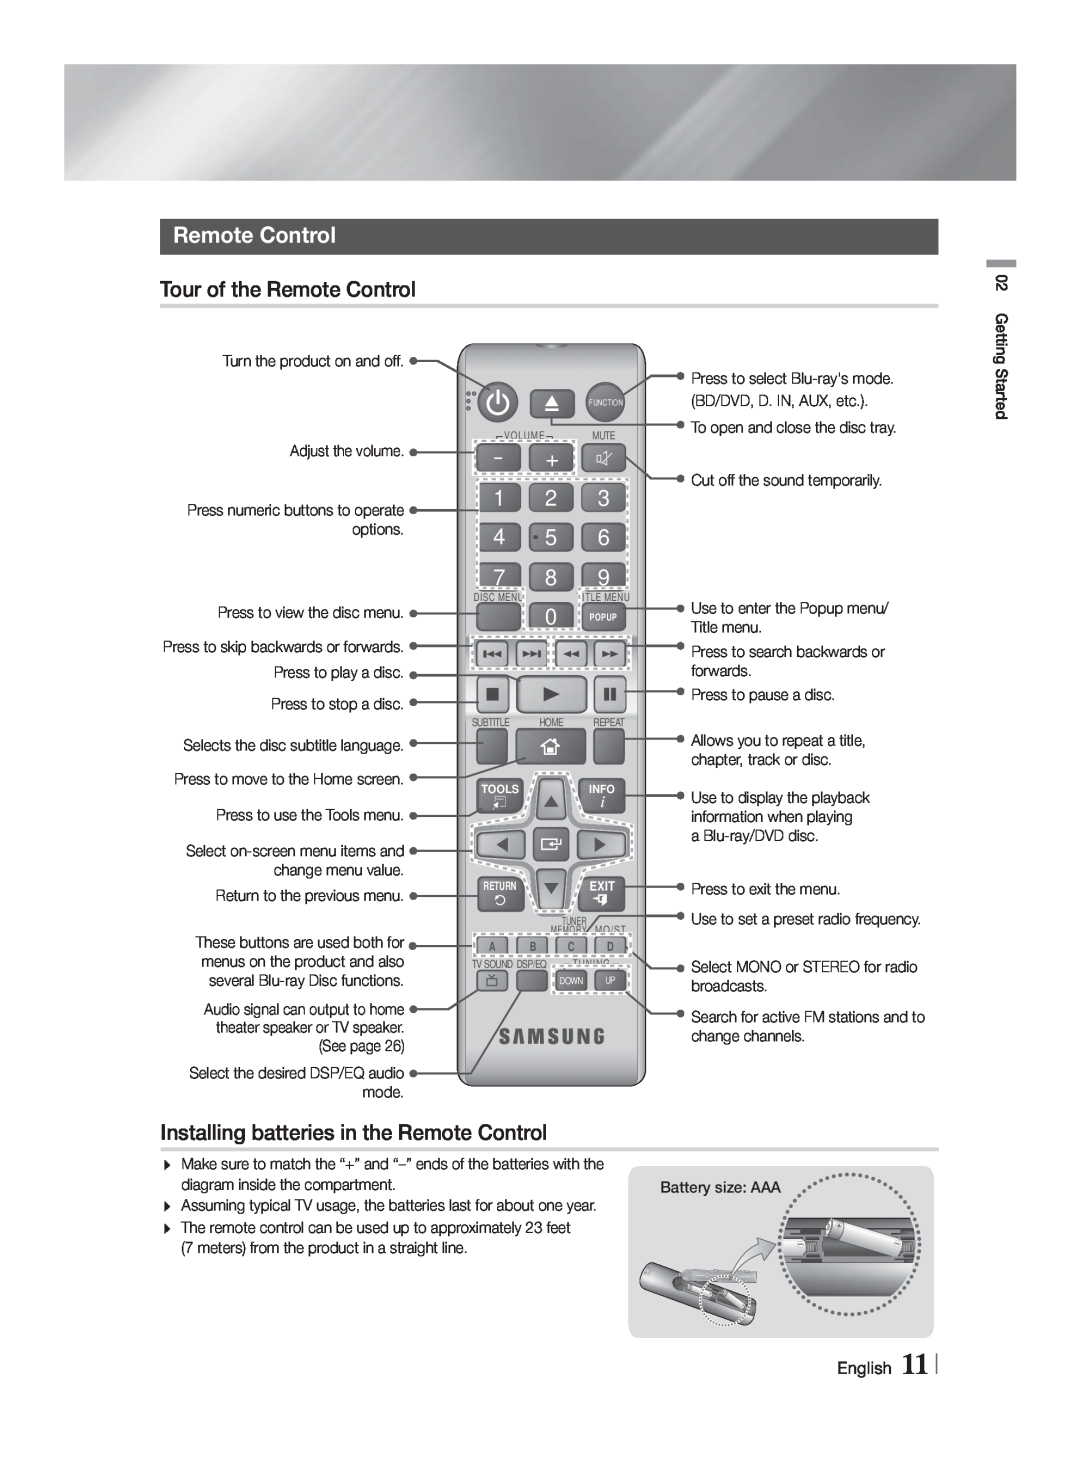 Samsung HTF4500ZA user manual Tour of the Remote Control, Installing batteries in the Remote Control, English 